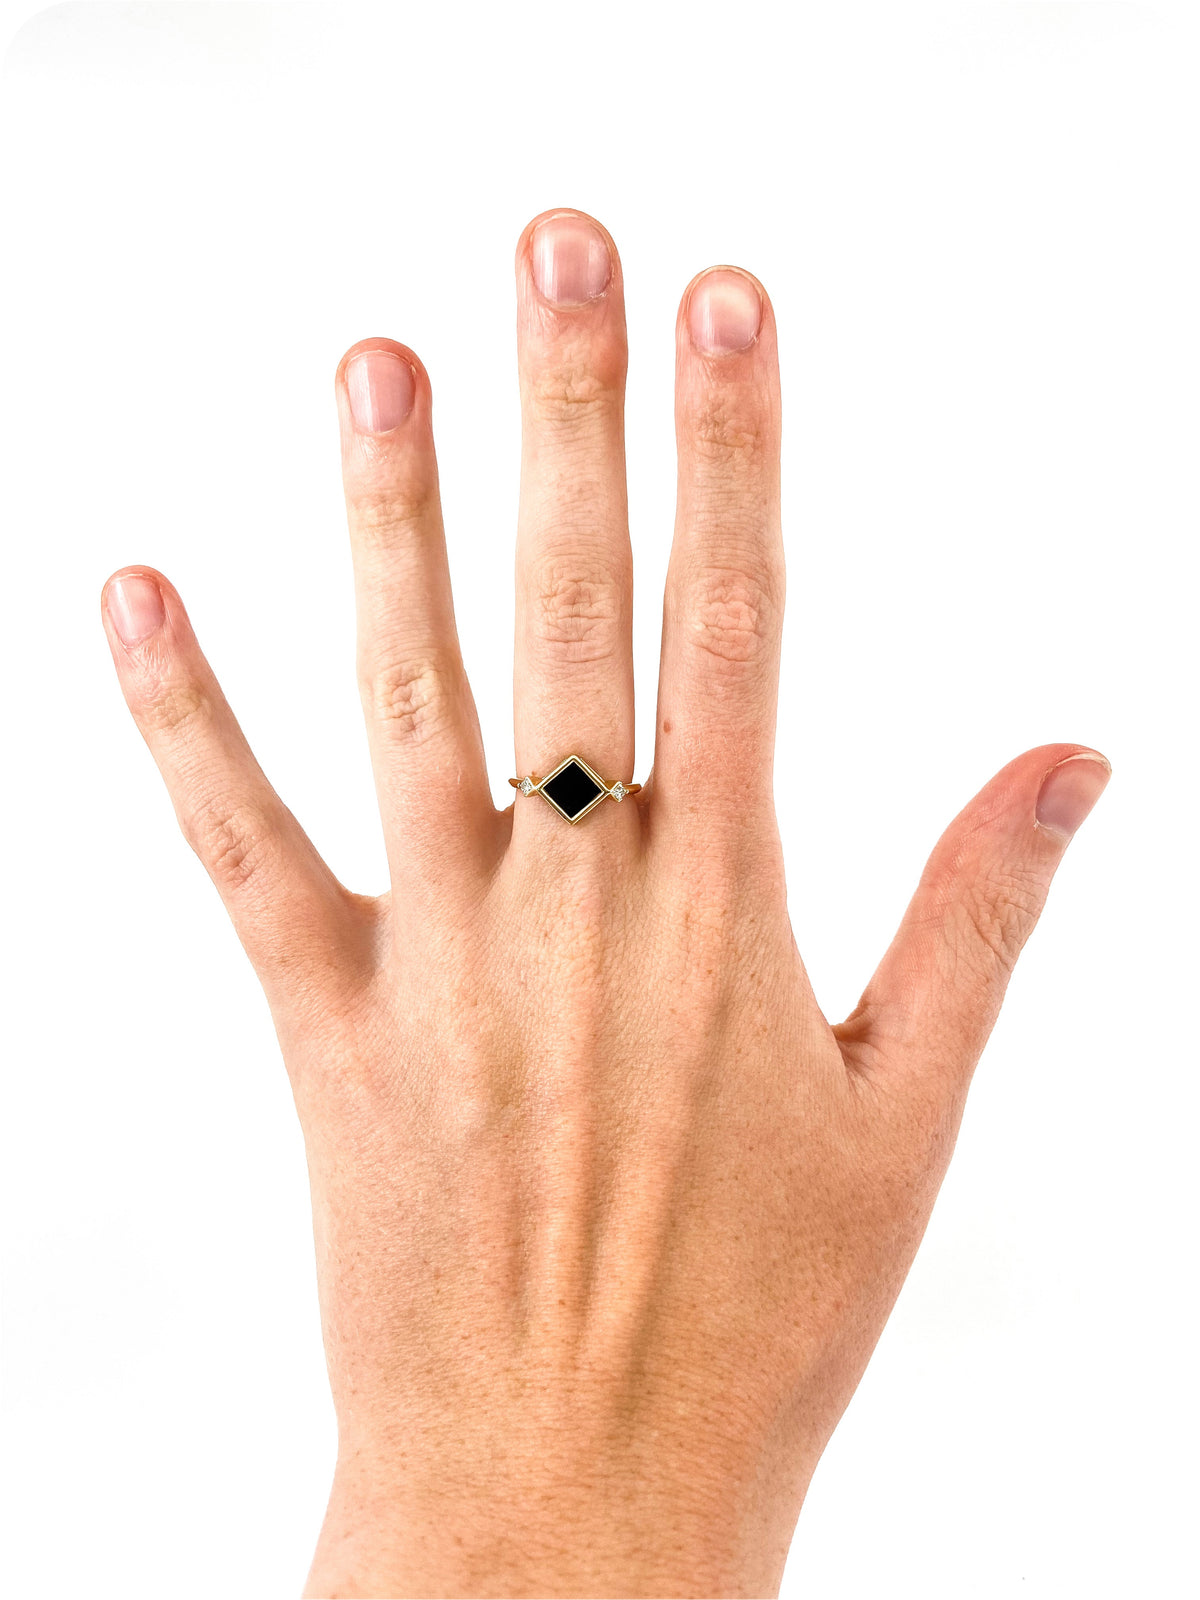 10K Yellow Gold 6mm Onyx And 0.084cttw Canadian Diamond Ring, size 6.5